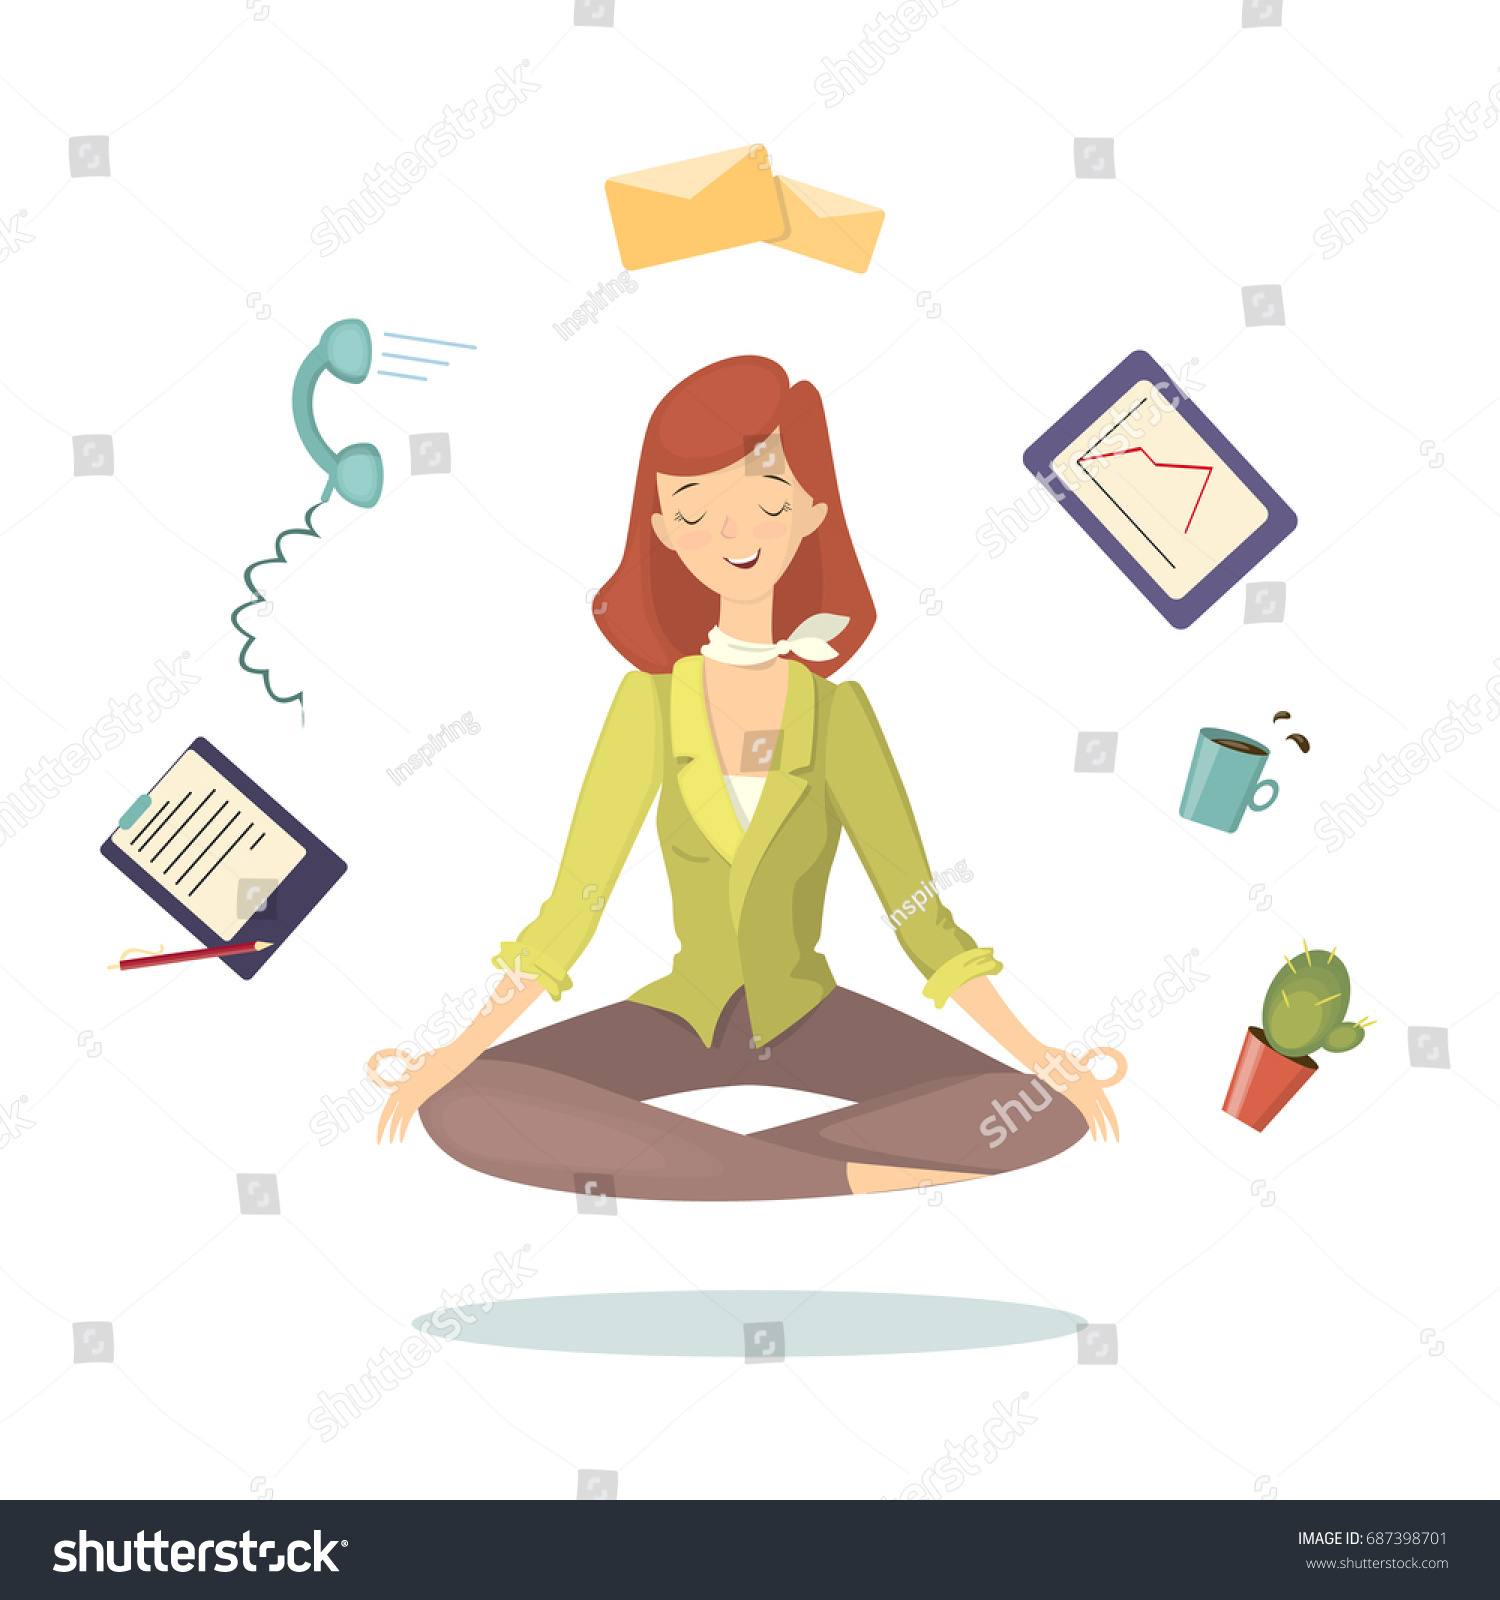 stock-vector-meditation-at-work-woman-in-lotus-pose-between-working-tools-on-white-background-687398701.jpg